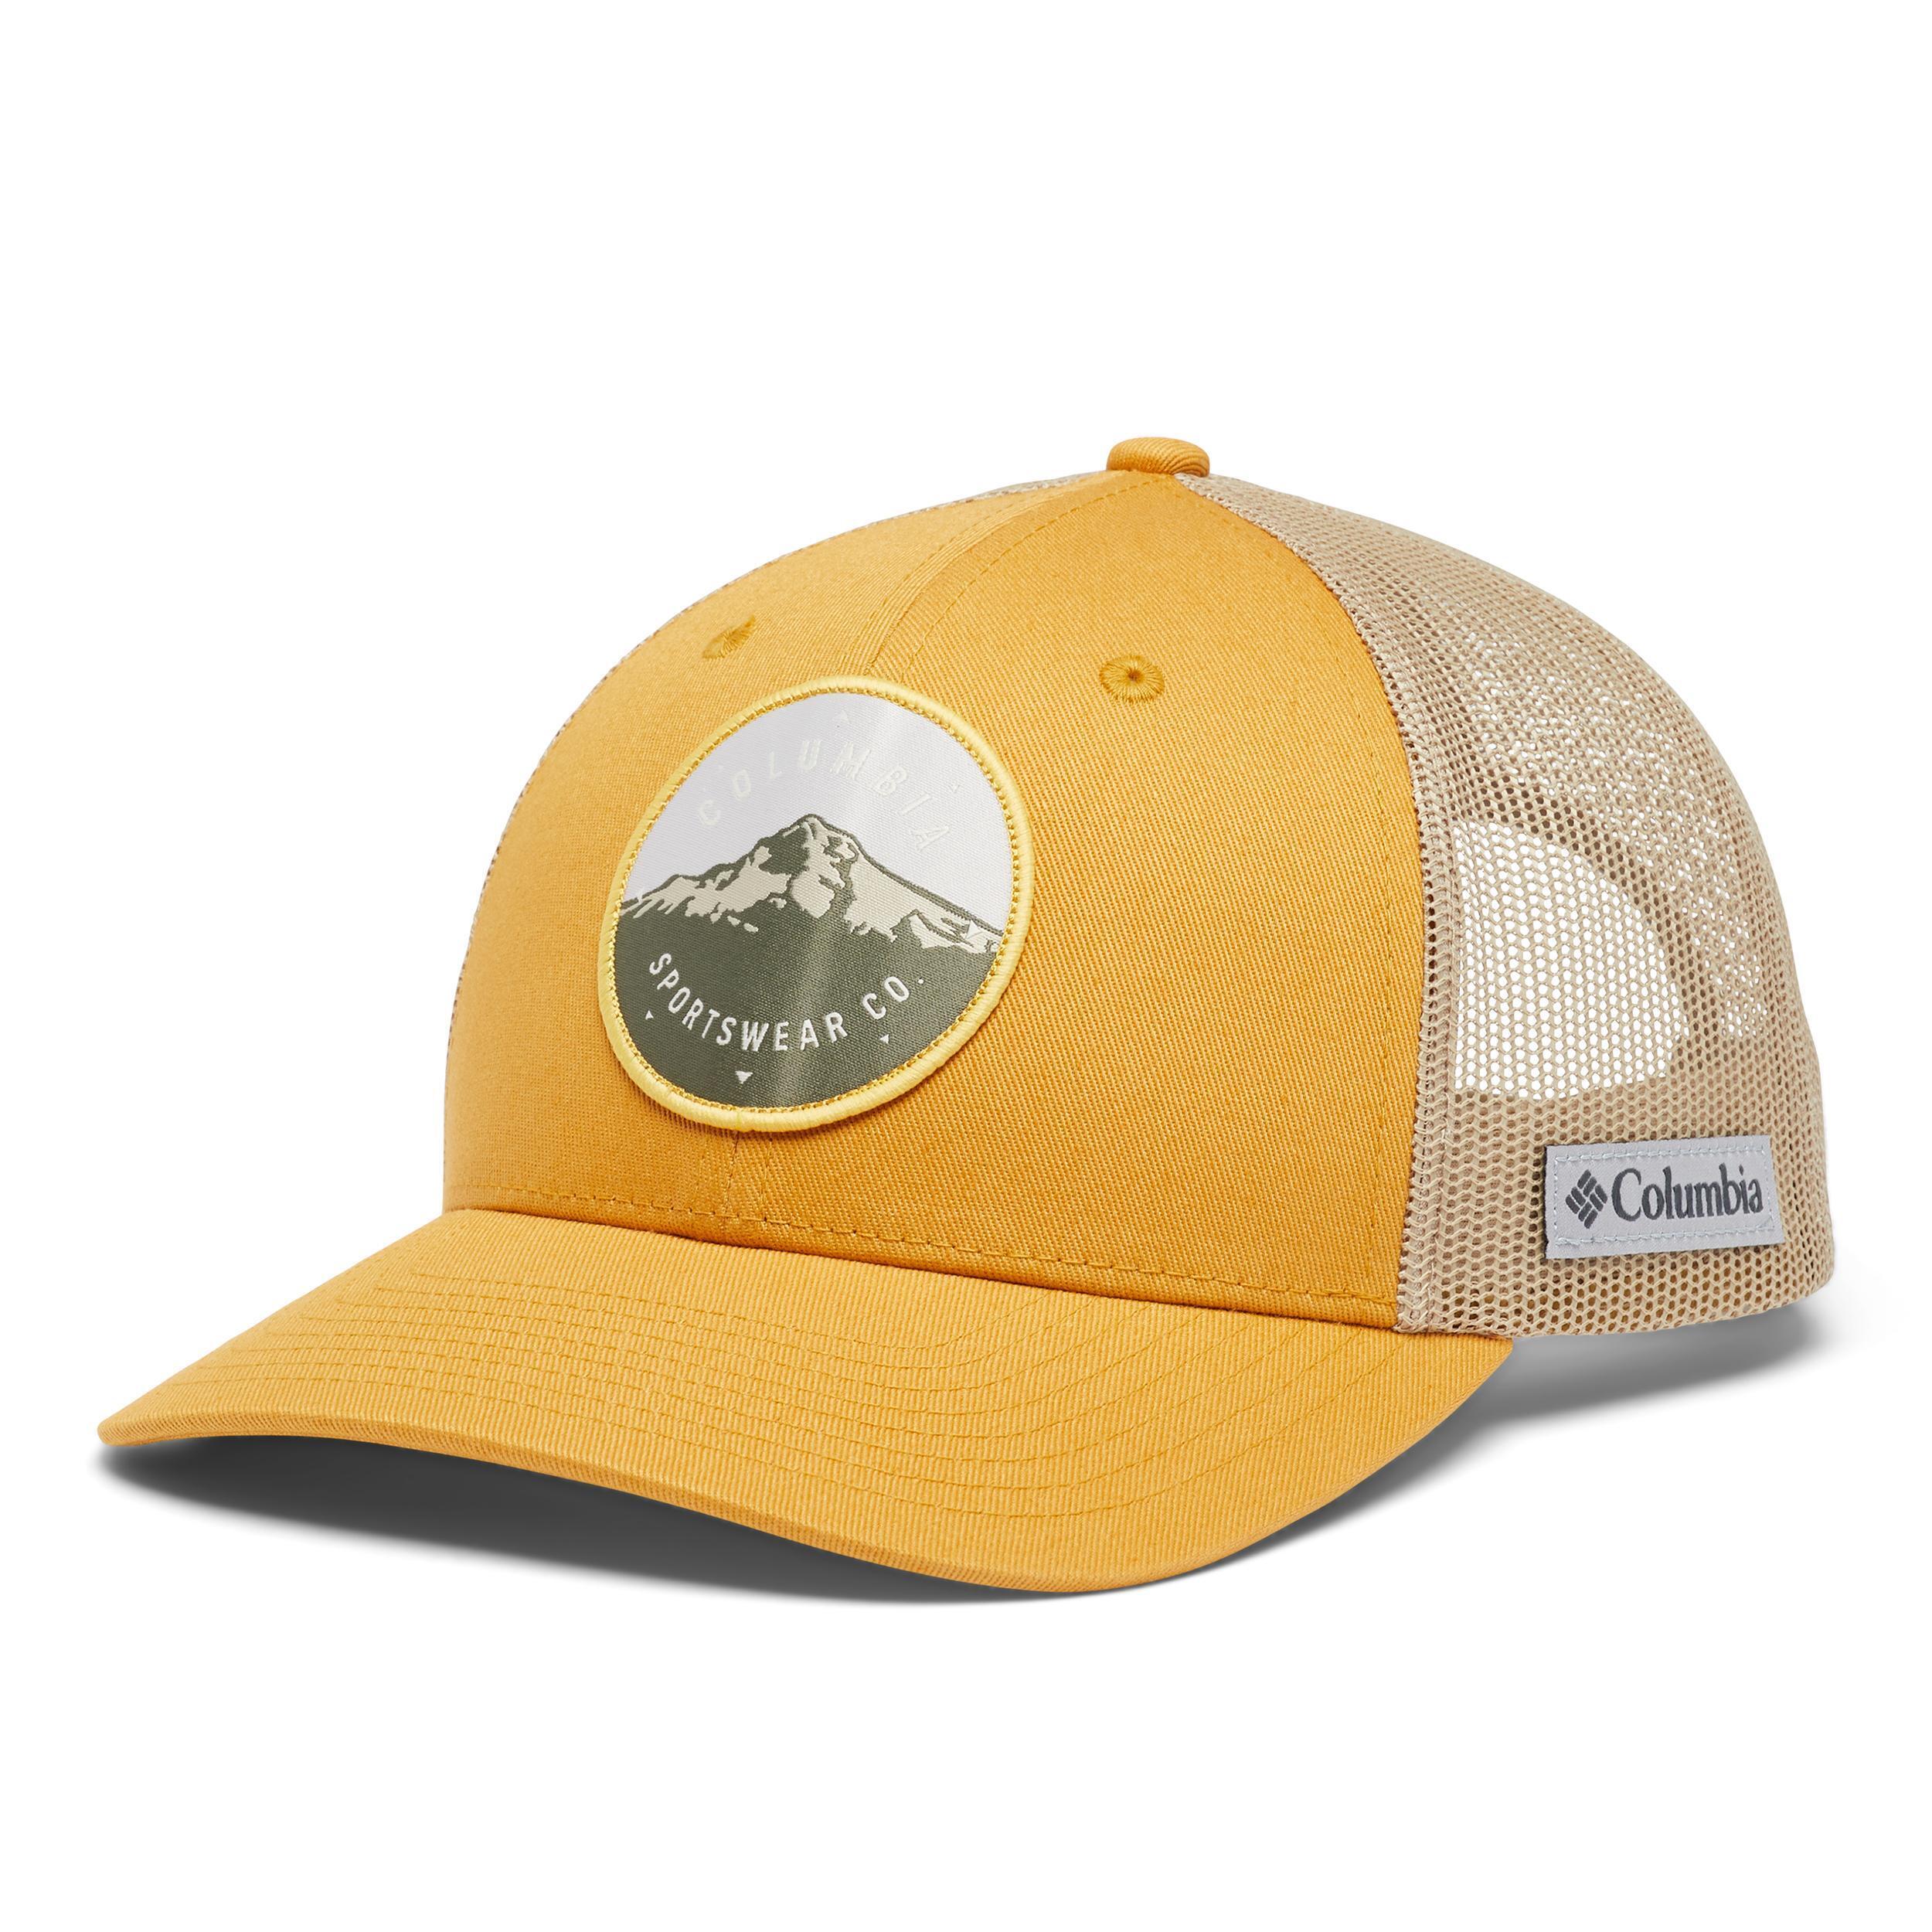 COLUMBIA Casquette Columbia Trucker Mesh Snapback Ocre - Homme